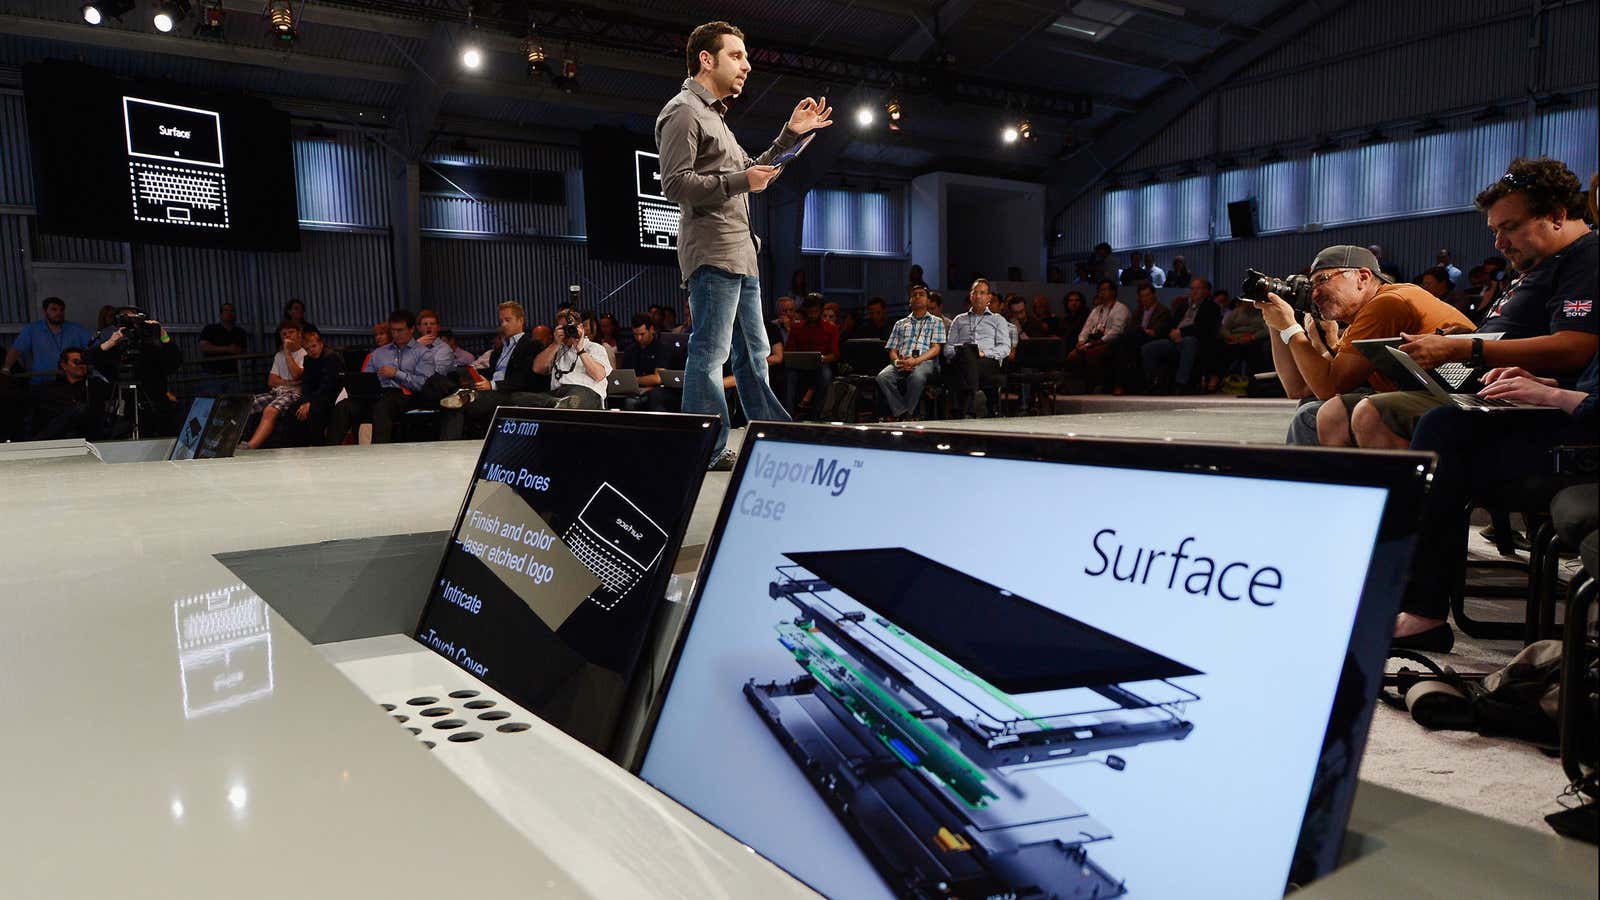 The Surface launch event